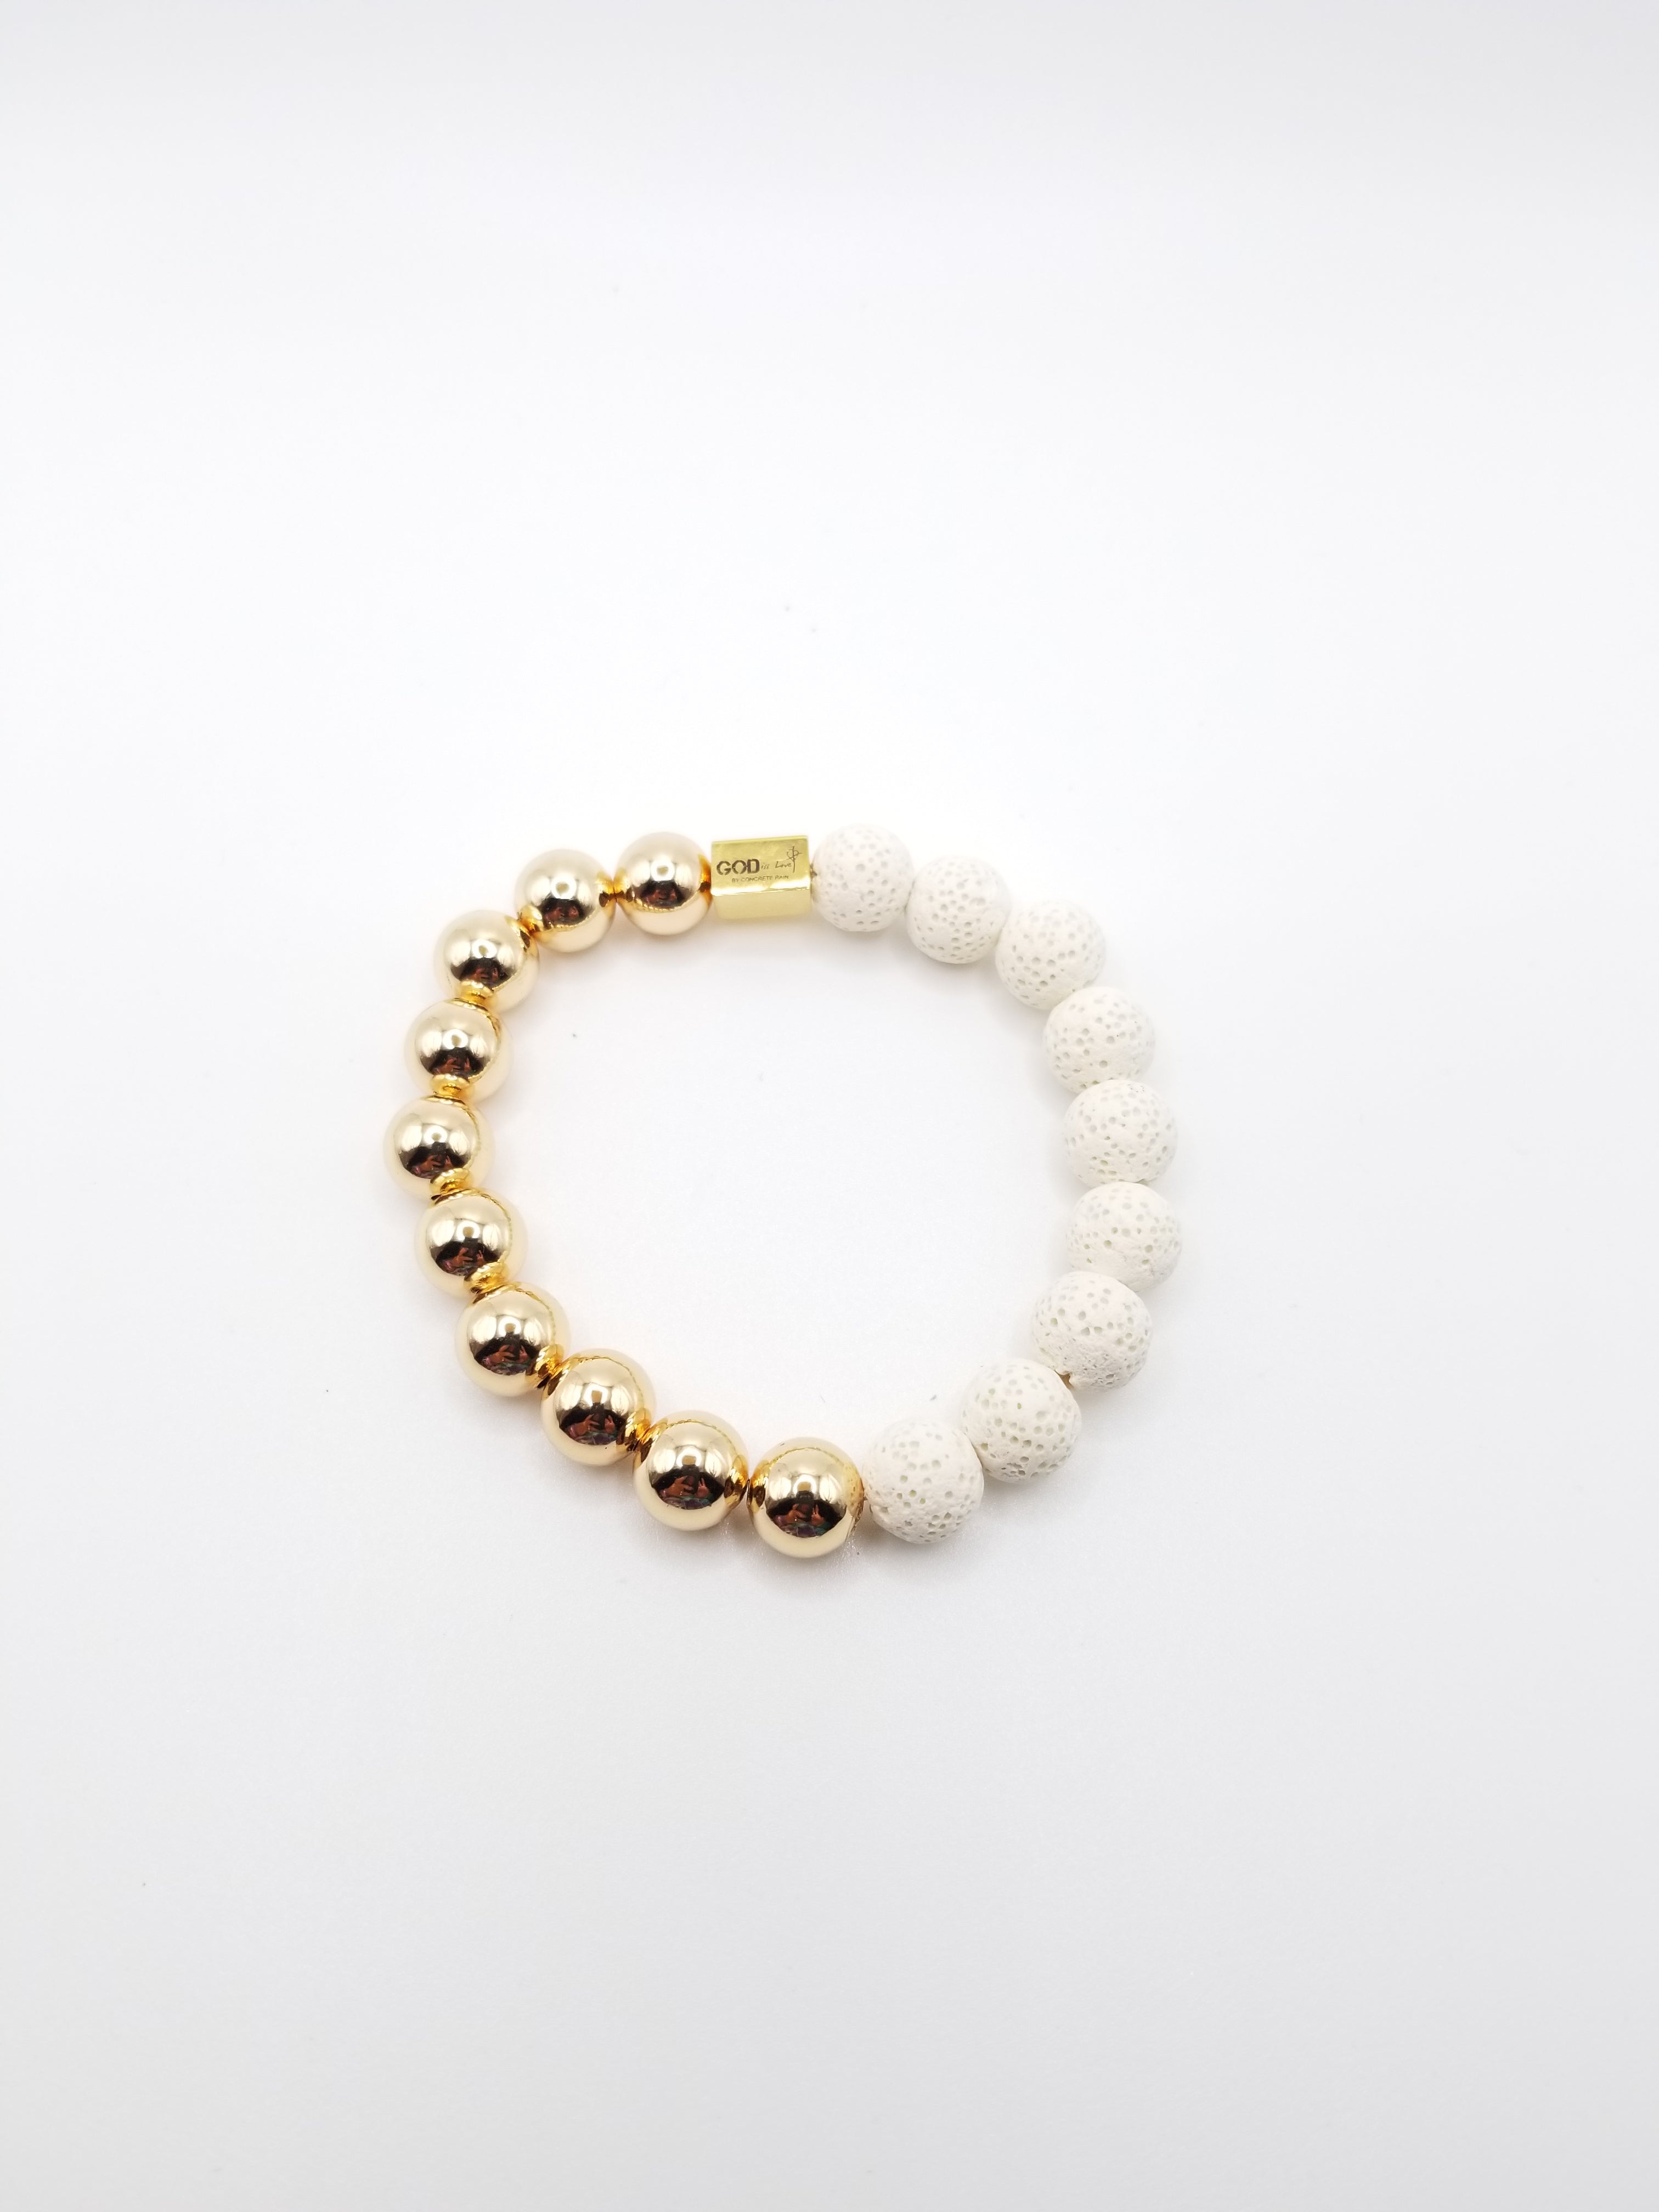 Gold-filled and Lava Stone Beaded Bracelet